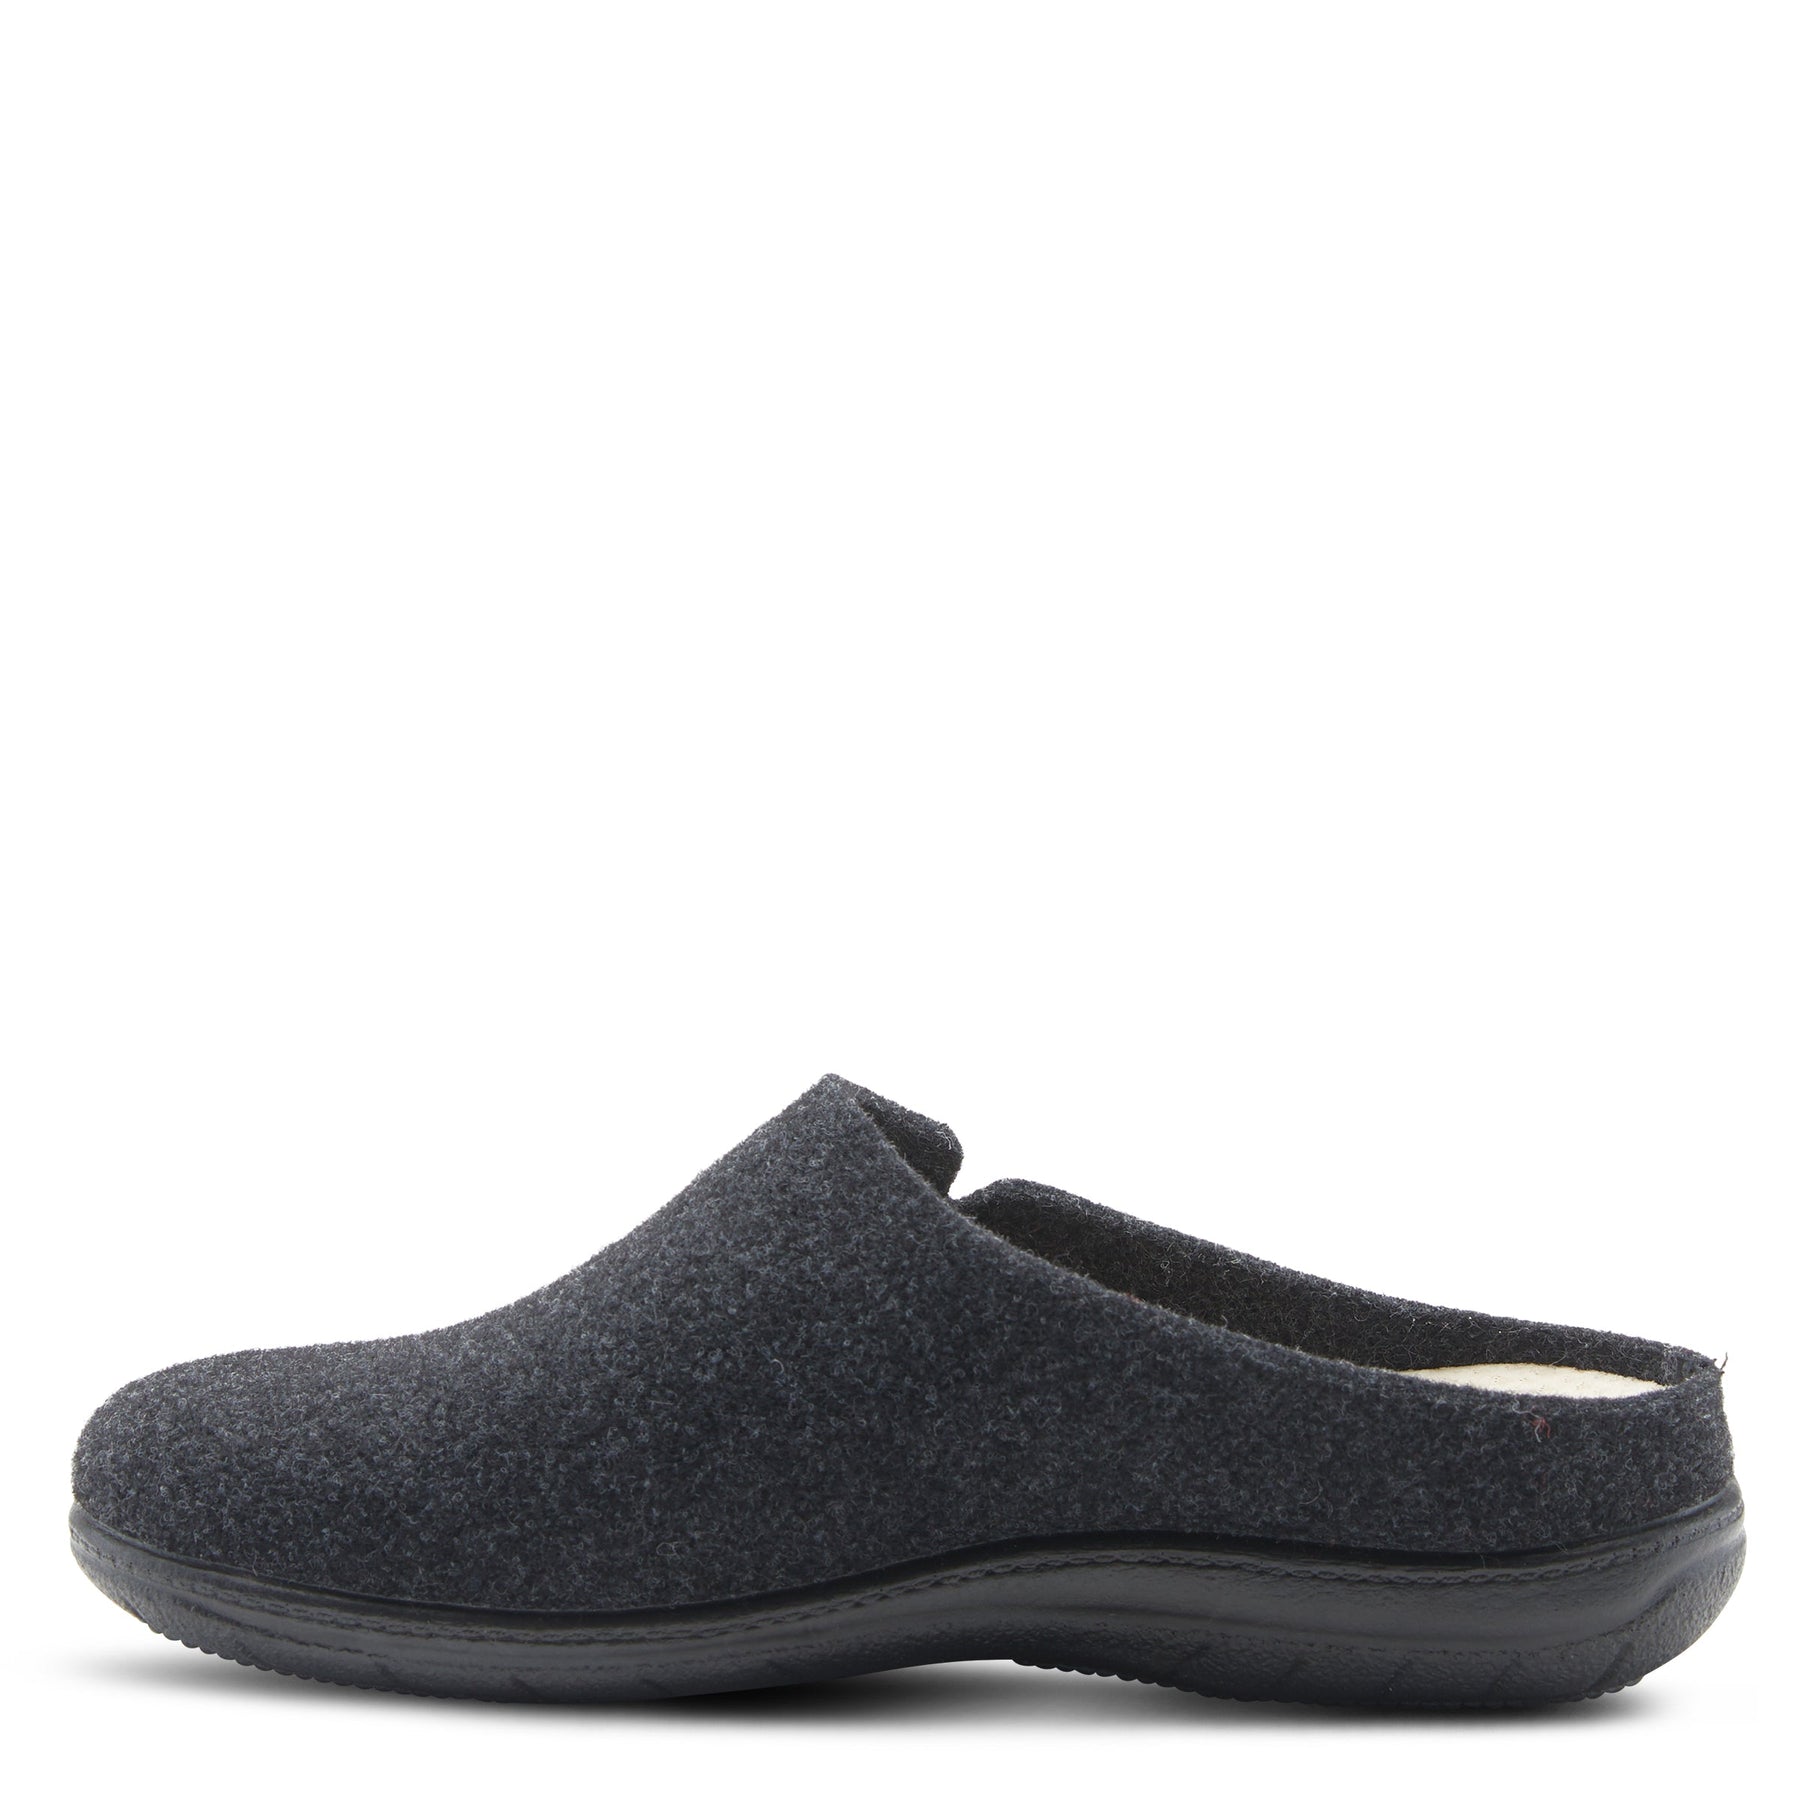 Flexus Lala Slippers: Comfy Indoor Slippers – Spring Step Shoes